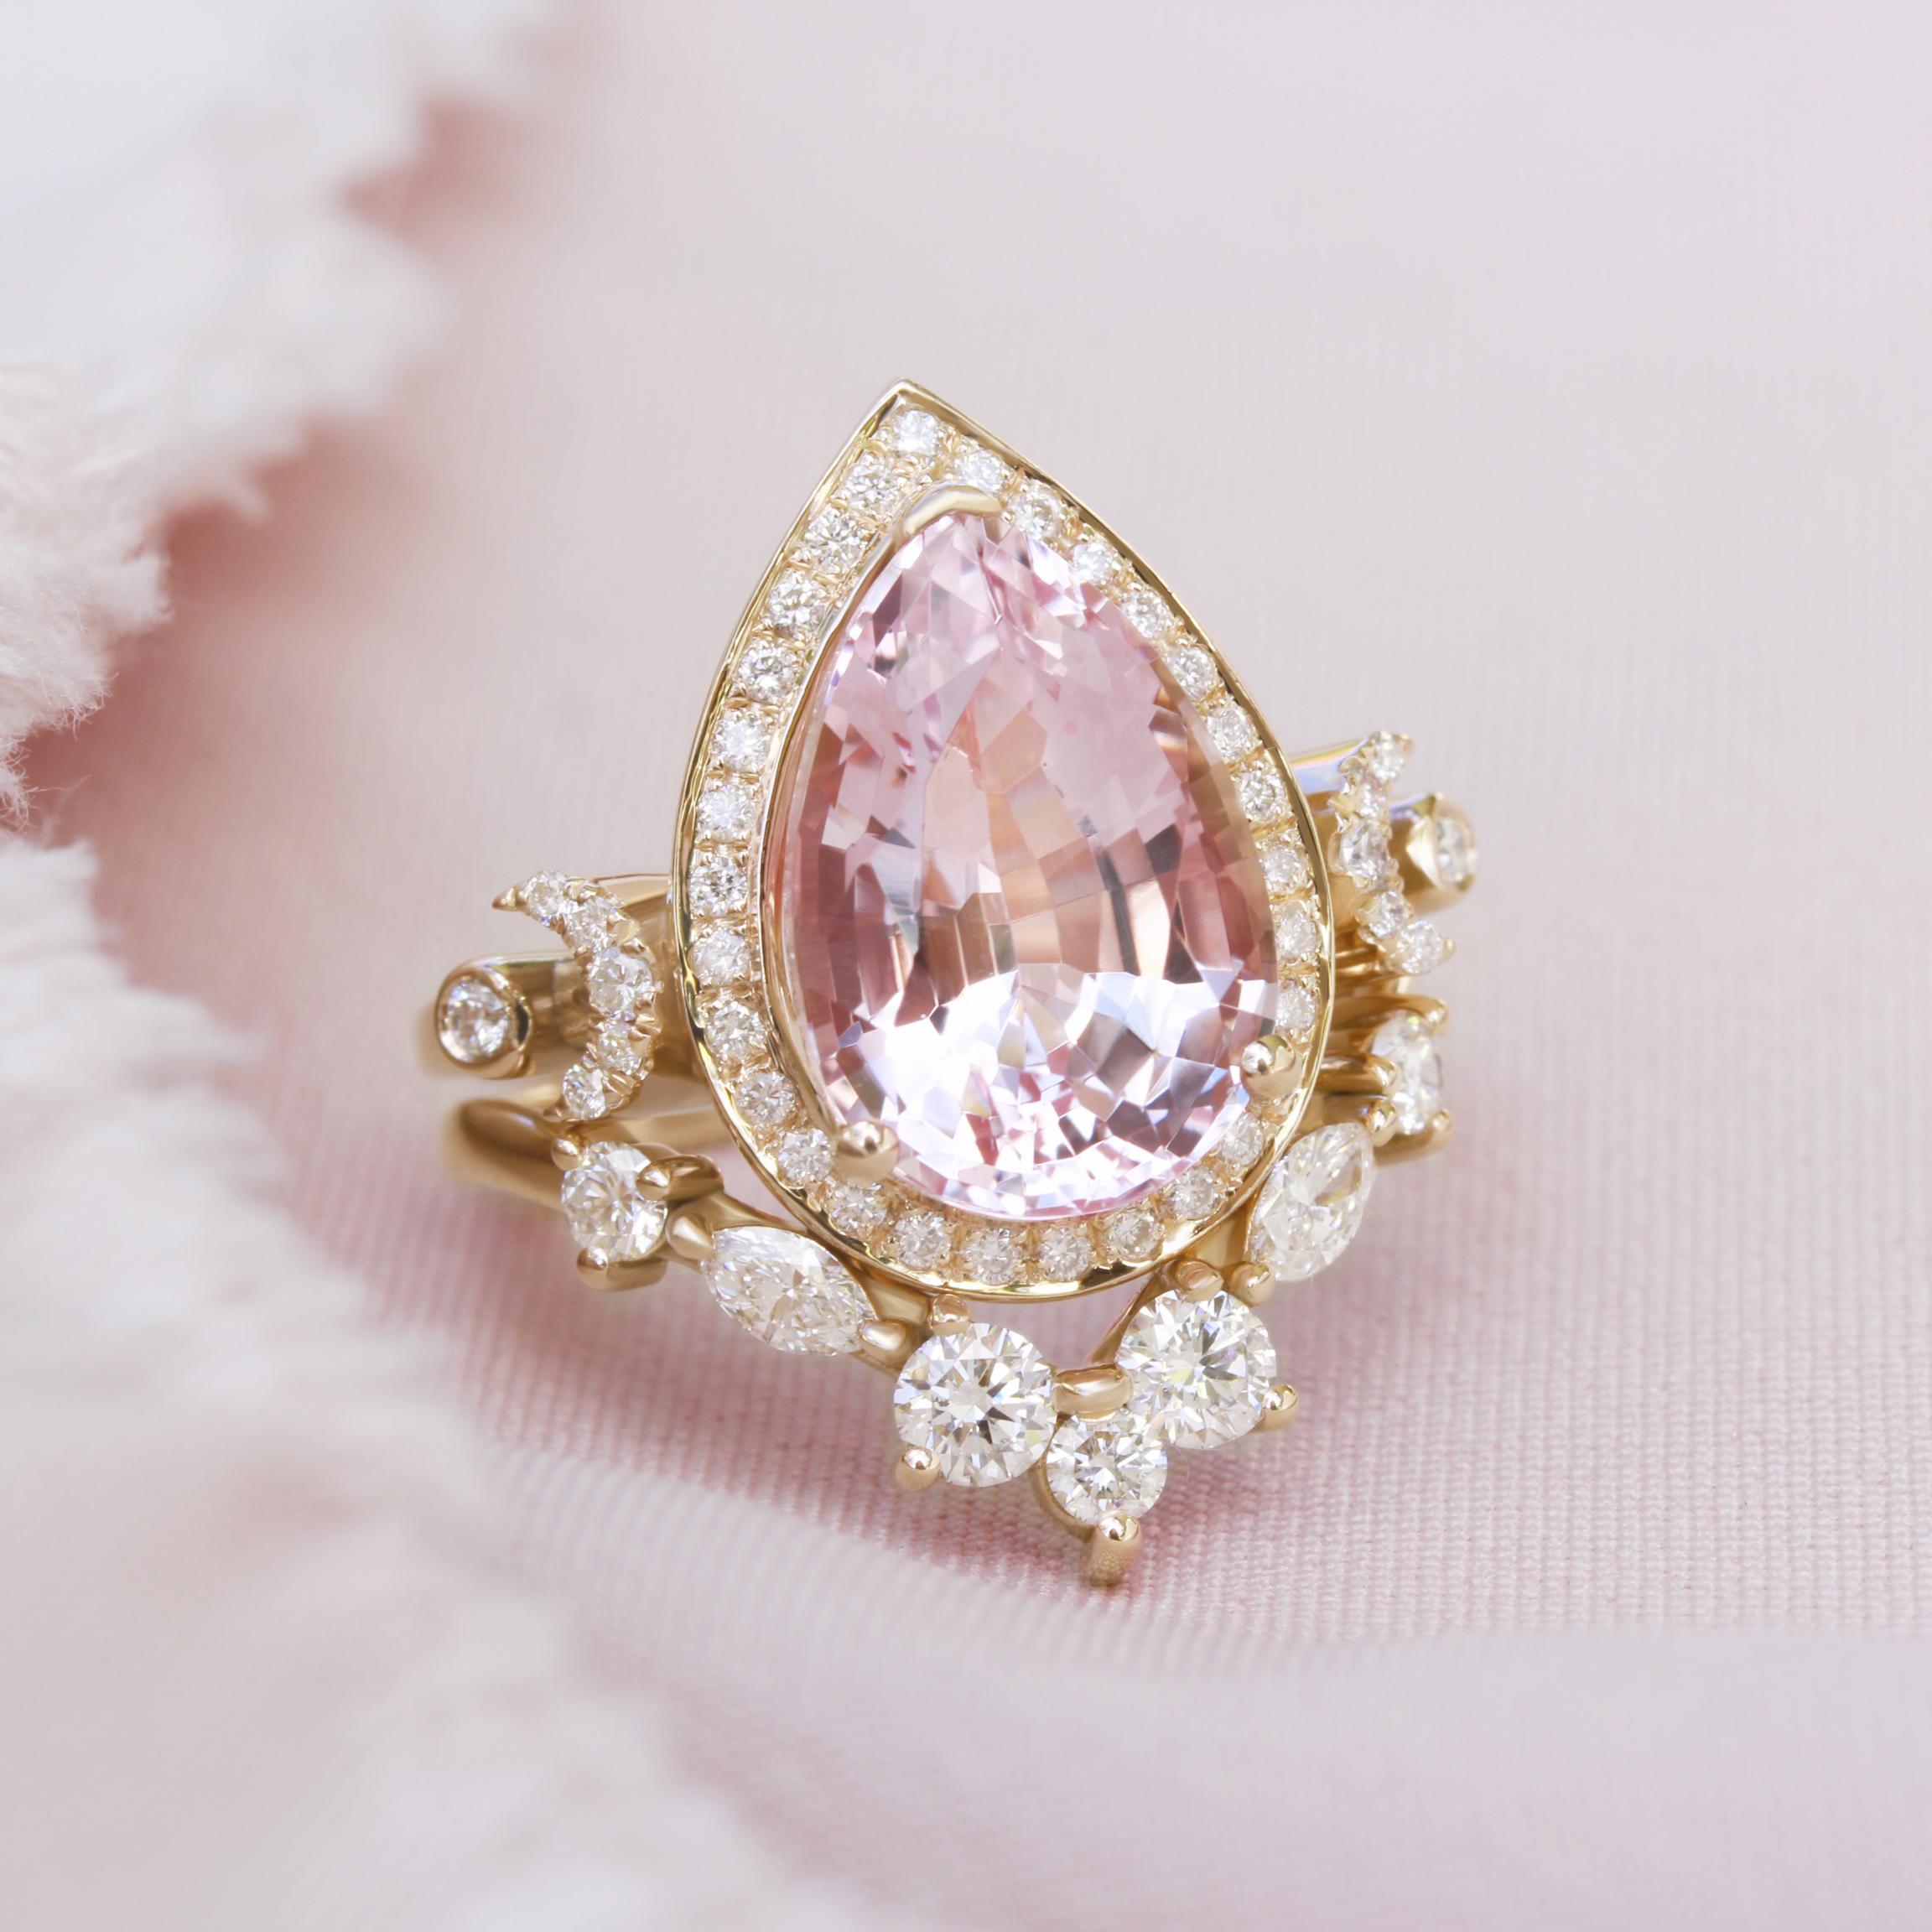 Engagement Big Pear Morganite Ring With Diamond Halo Center.
Featuring two diamond crescent moons on both sides of the engagement ring. 
The list is for a two ring set.
Handmade with care. 
An original design by Silly Shiny Diamonds. 

Details: 
*